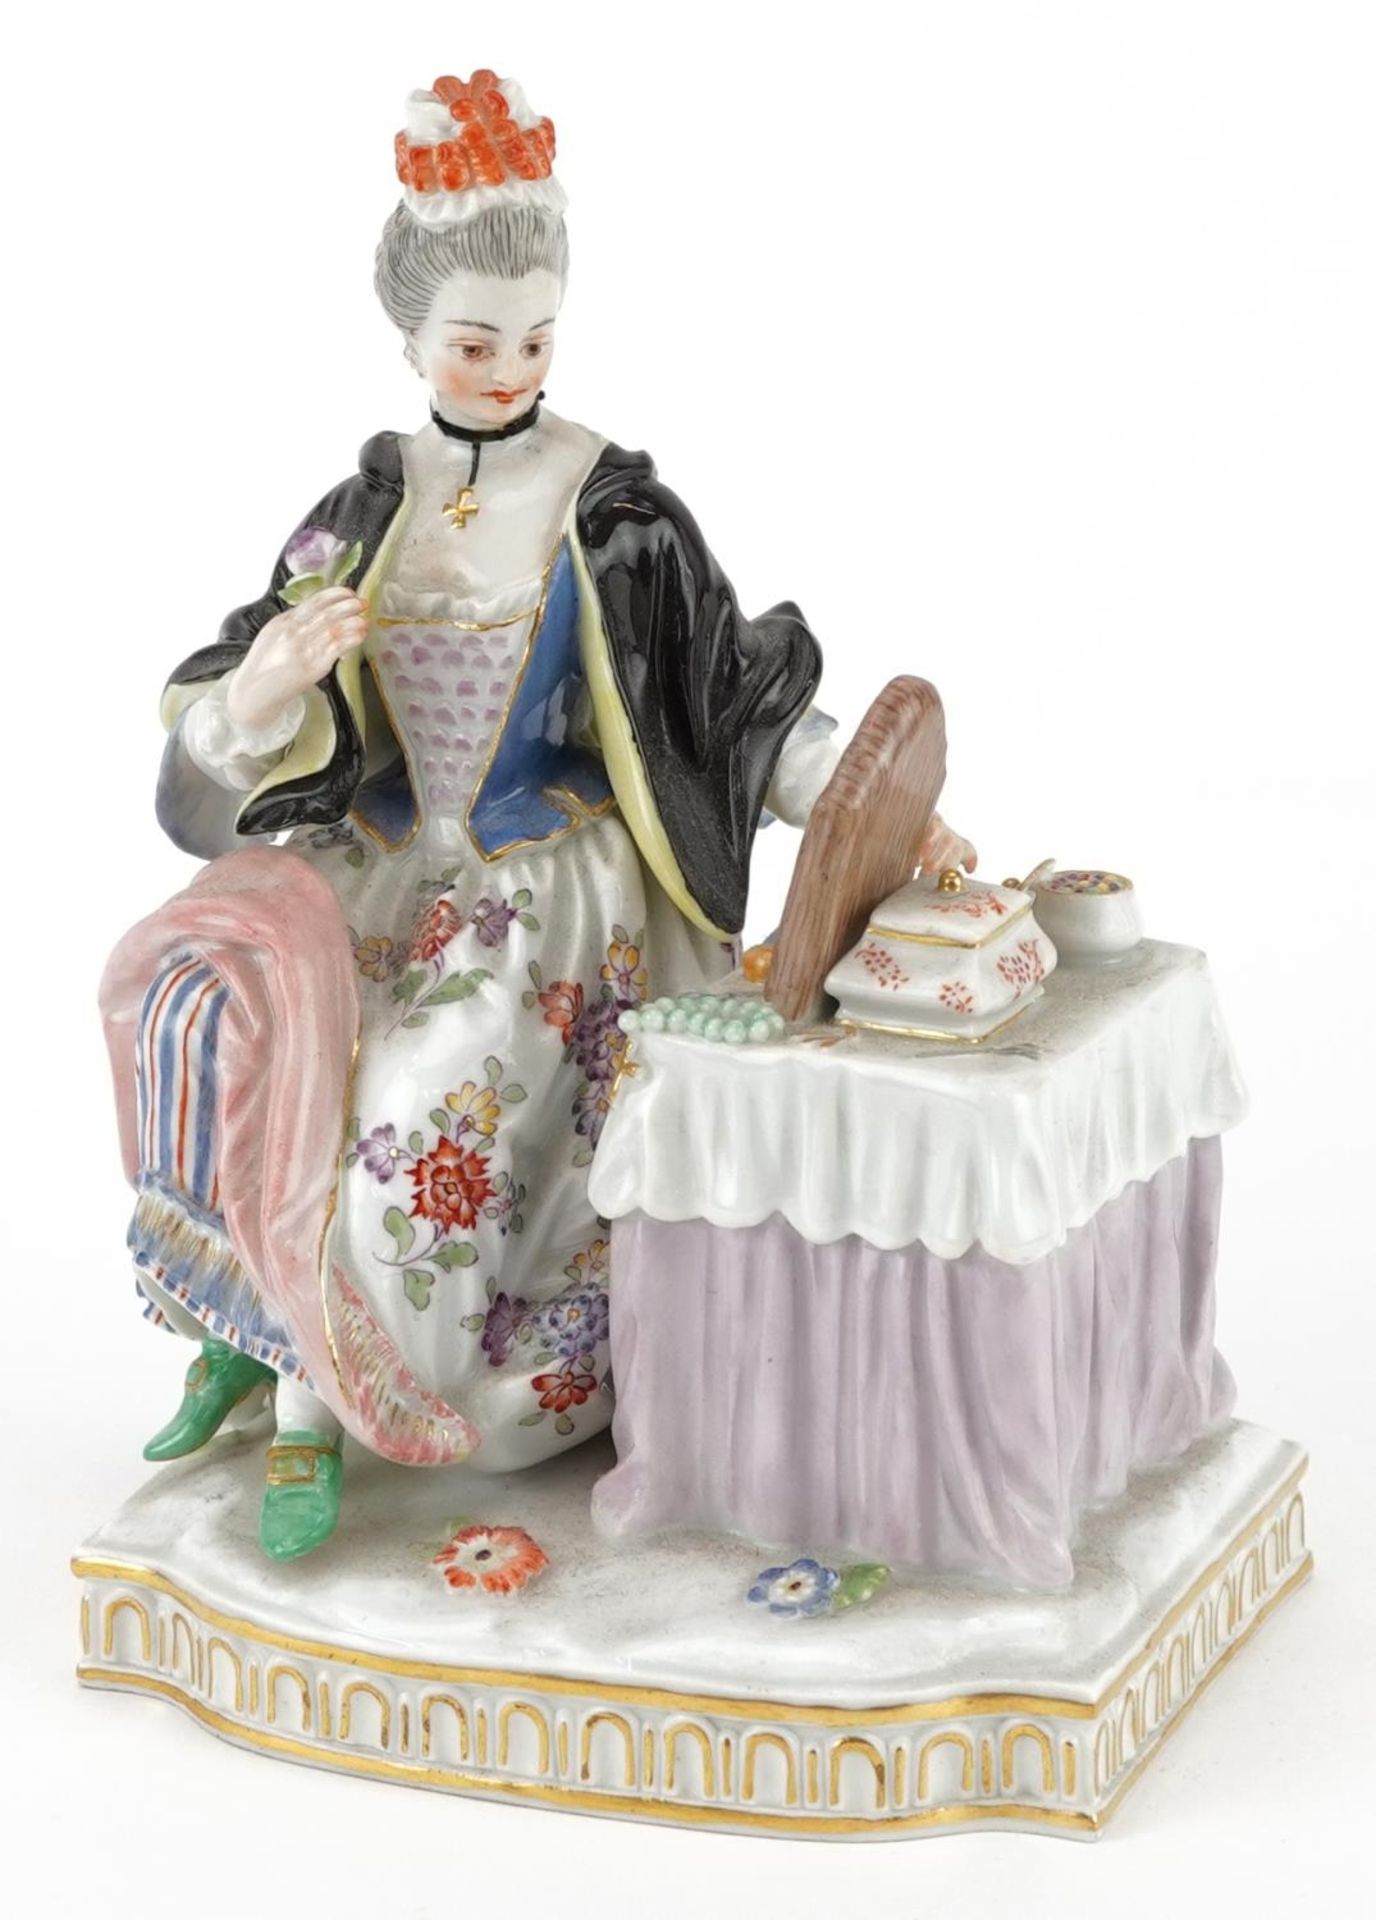 Meissen, 19th century German porcelain figure of a female sitting beside a dressing table with